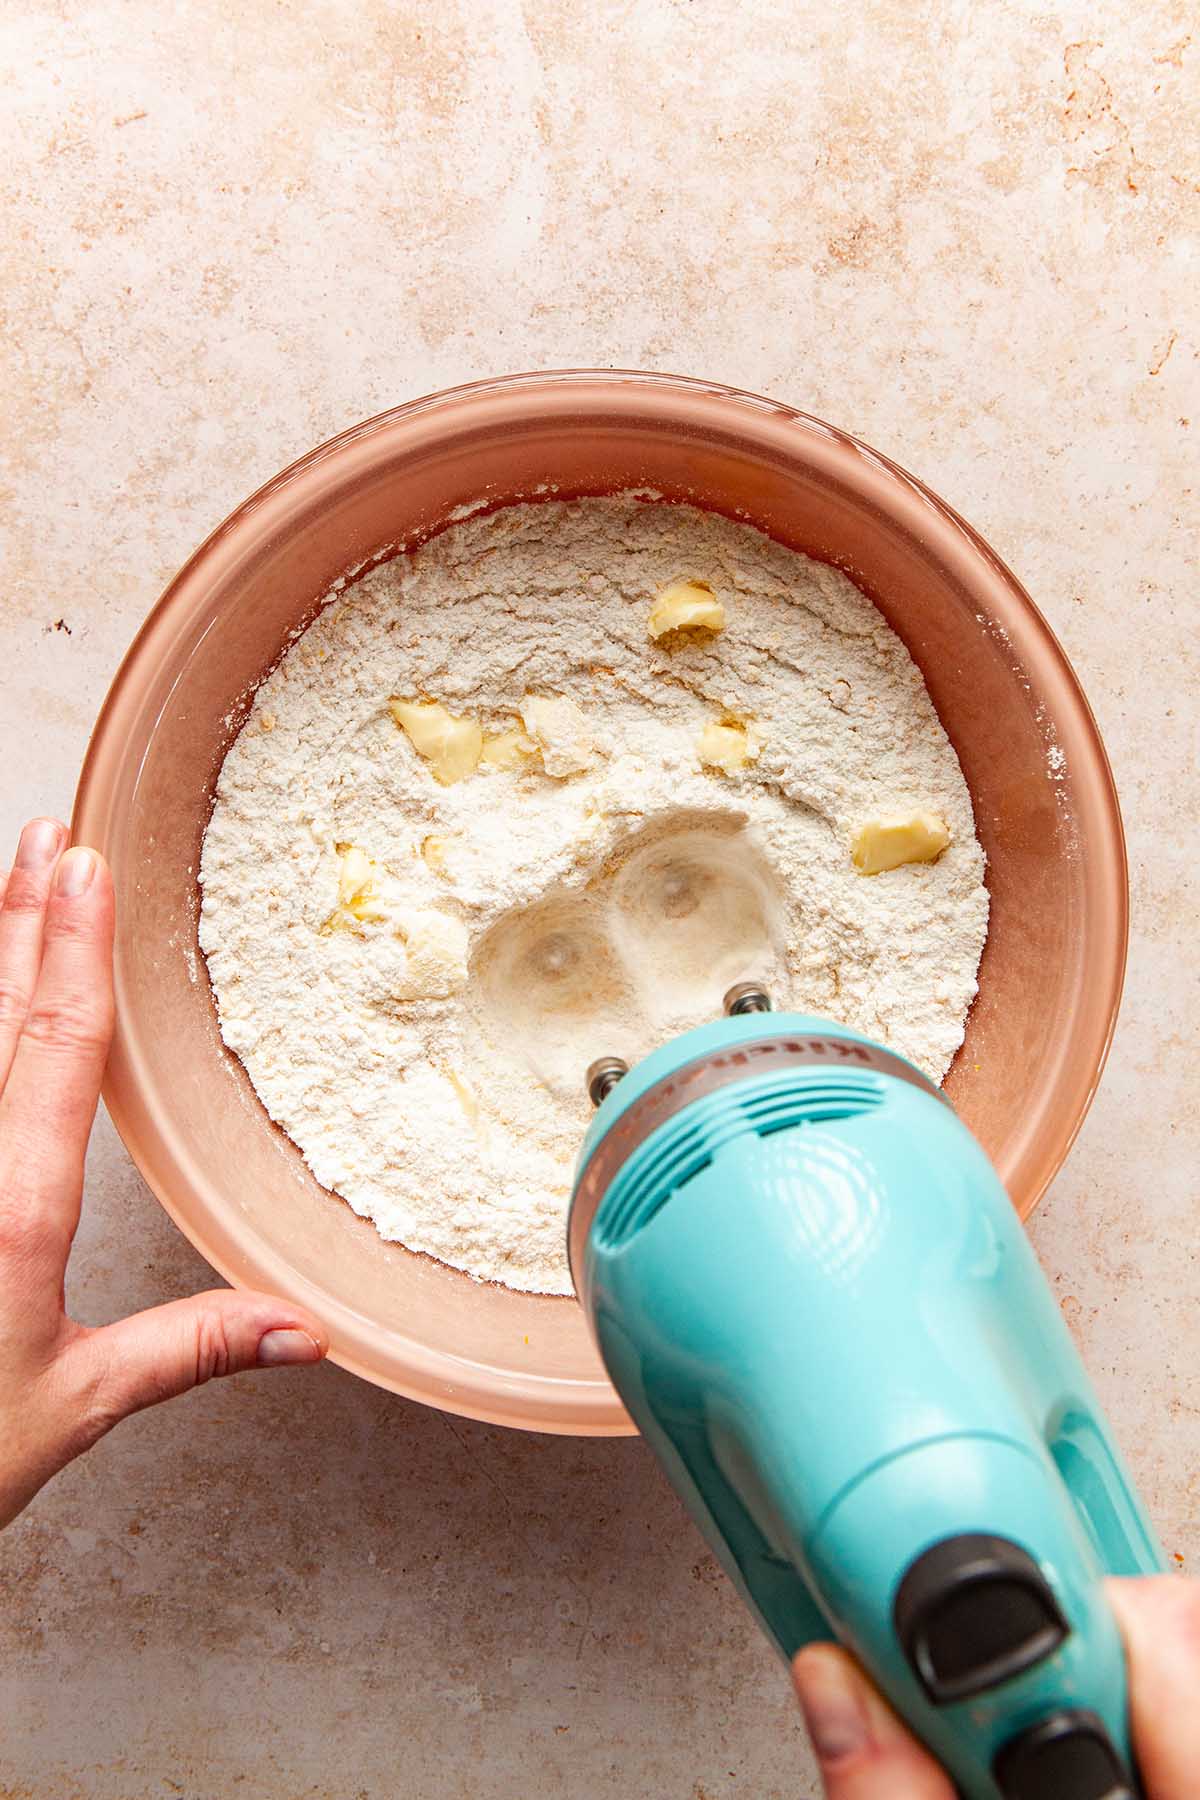 A hand using a hand mixer to mix small pieces of butter into flour.